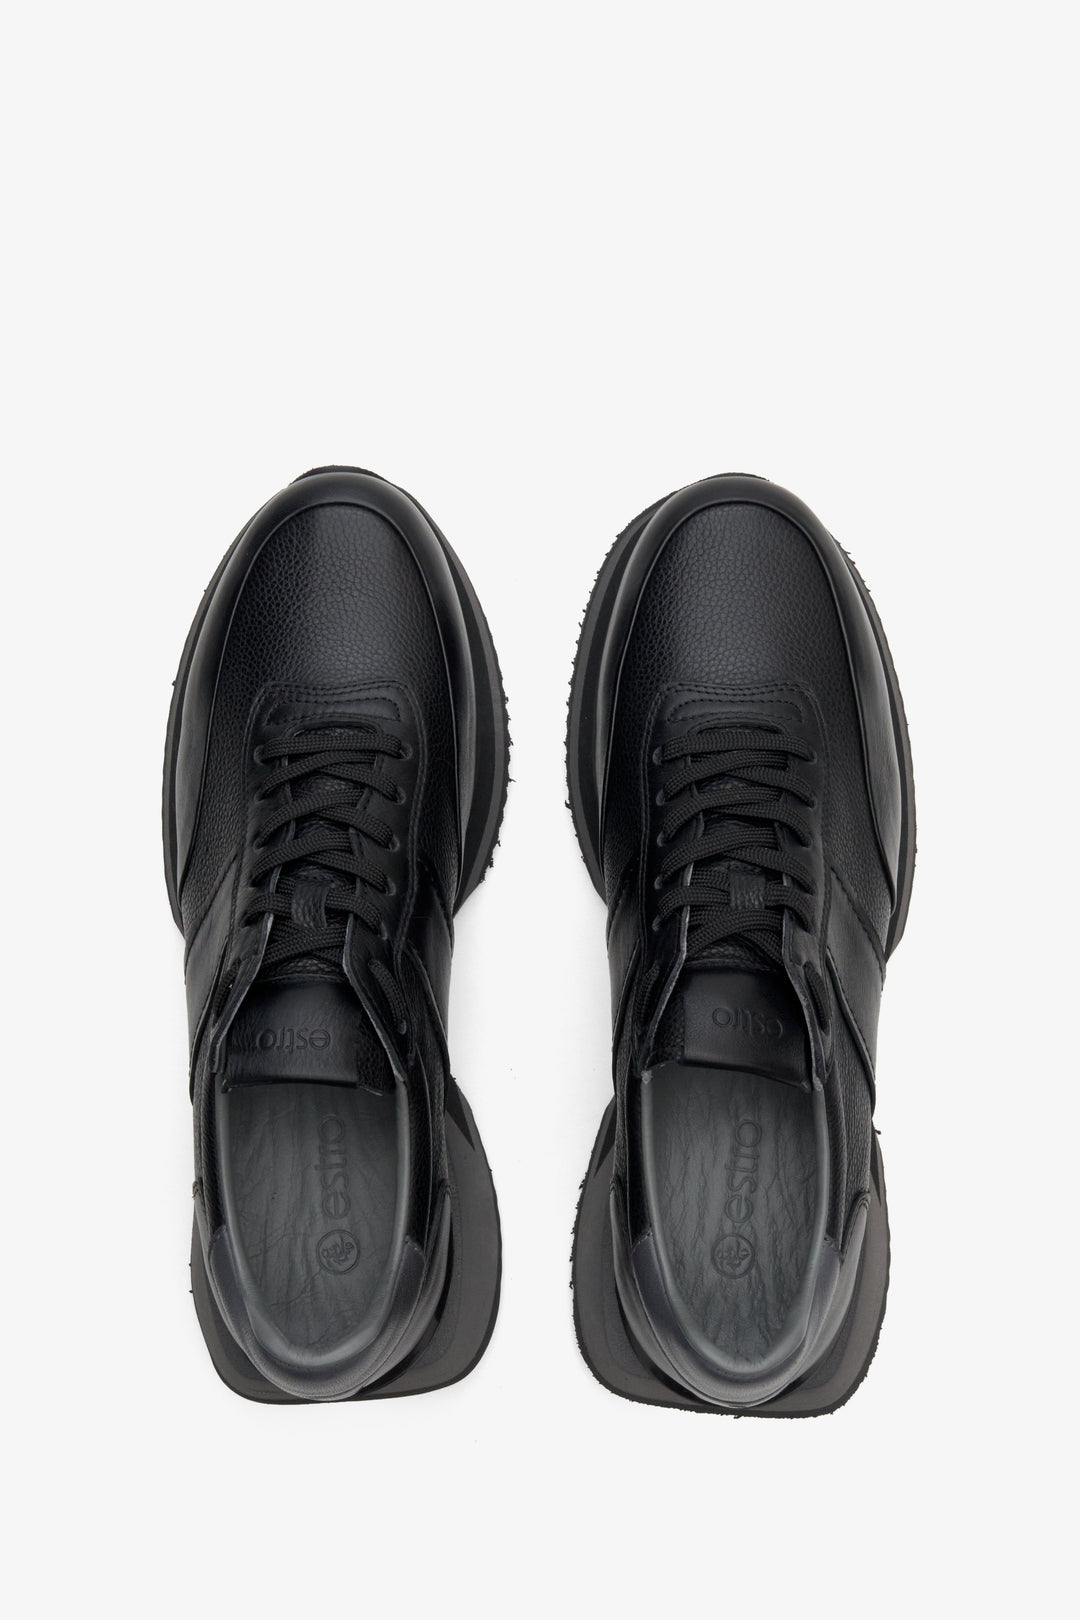 Men's sporty black sneakers in genuine leather by Estro - top view presentation of the model.